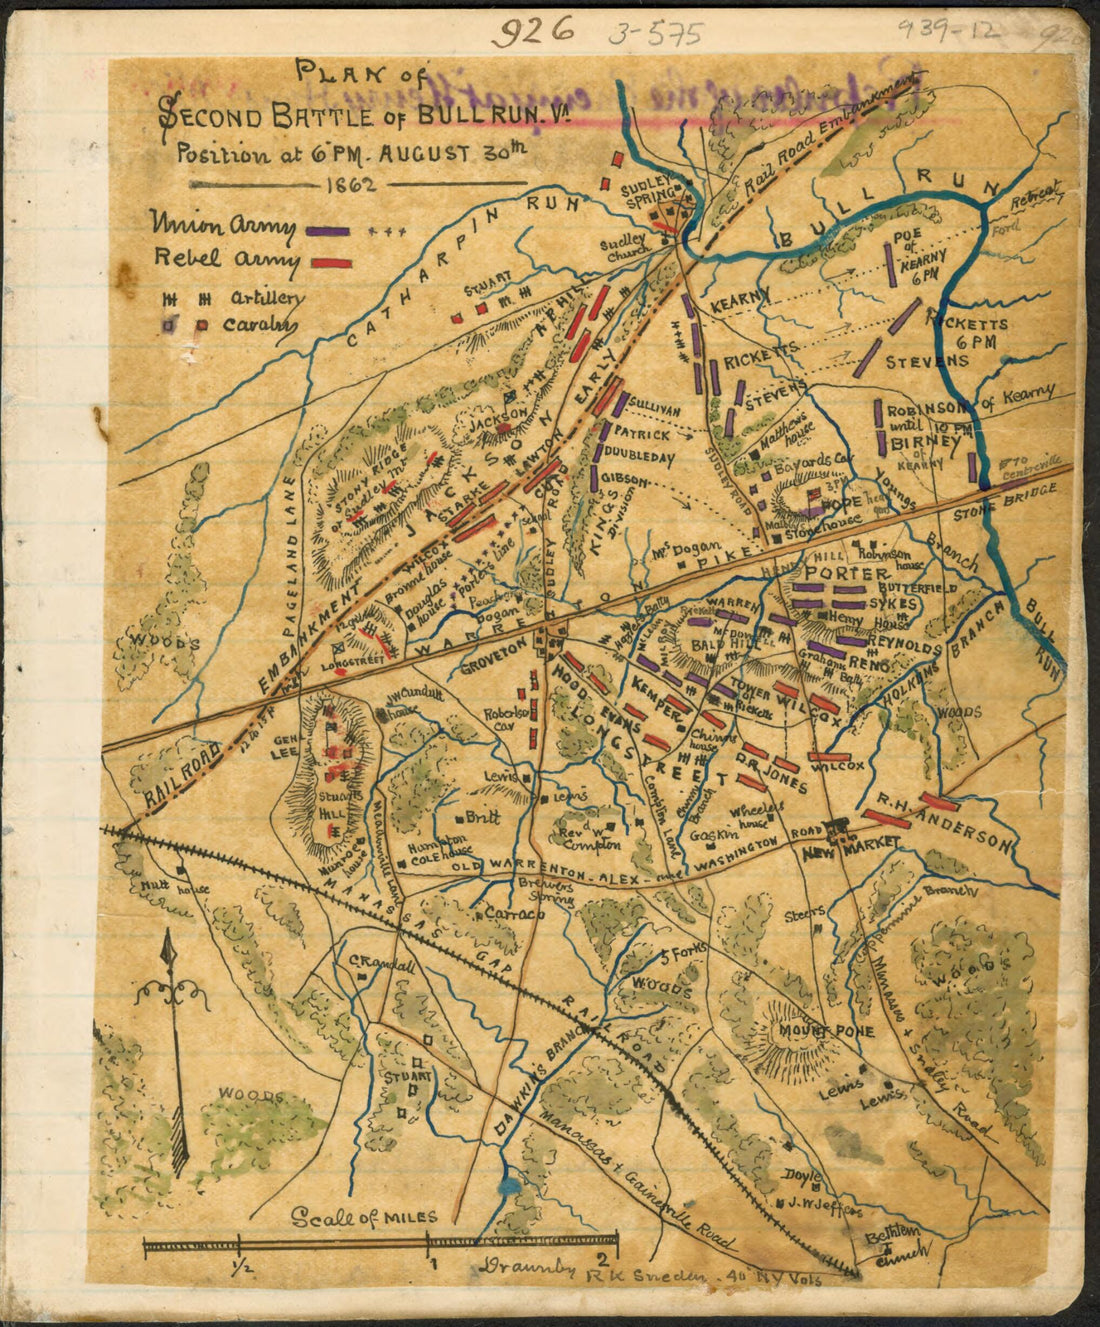 This old map of Plan of Second Battle of Bull Run Va. : Position at 6 P.m. August 30th 1862 from 08-30 was created by Robert Knox Sneden in 08-30